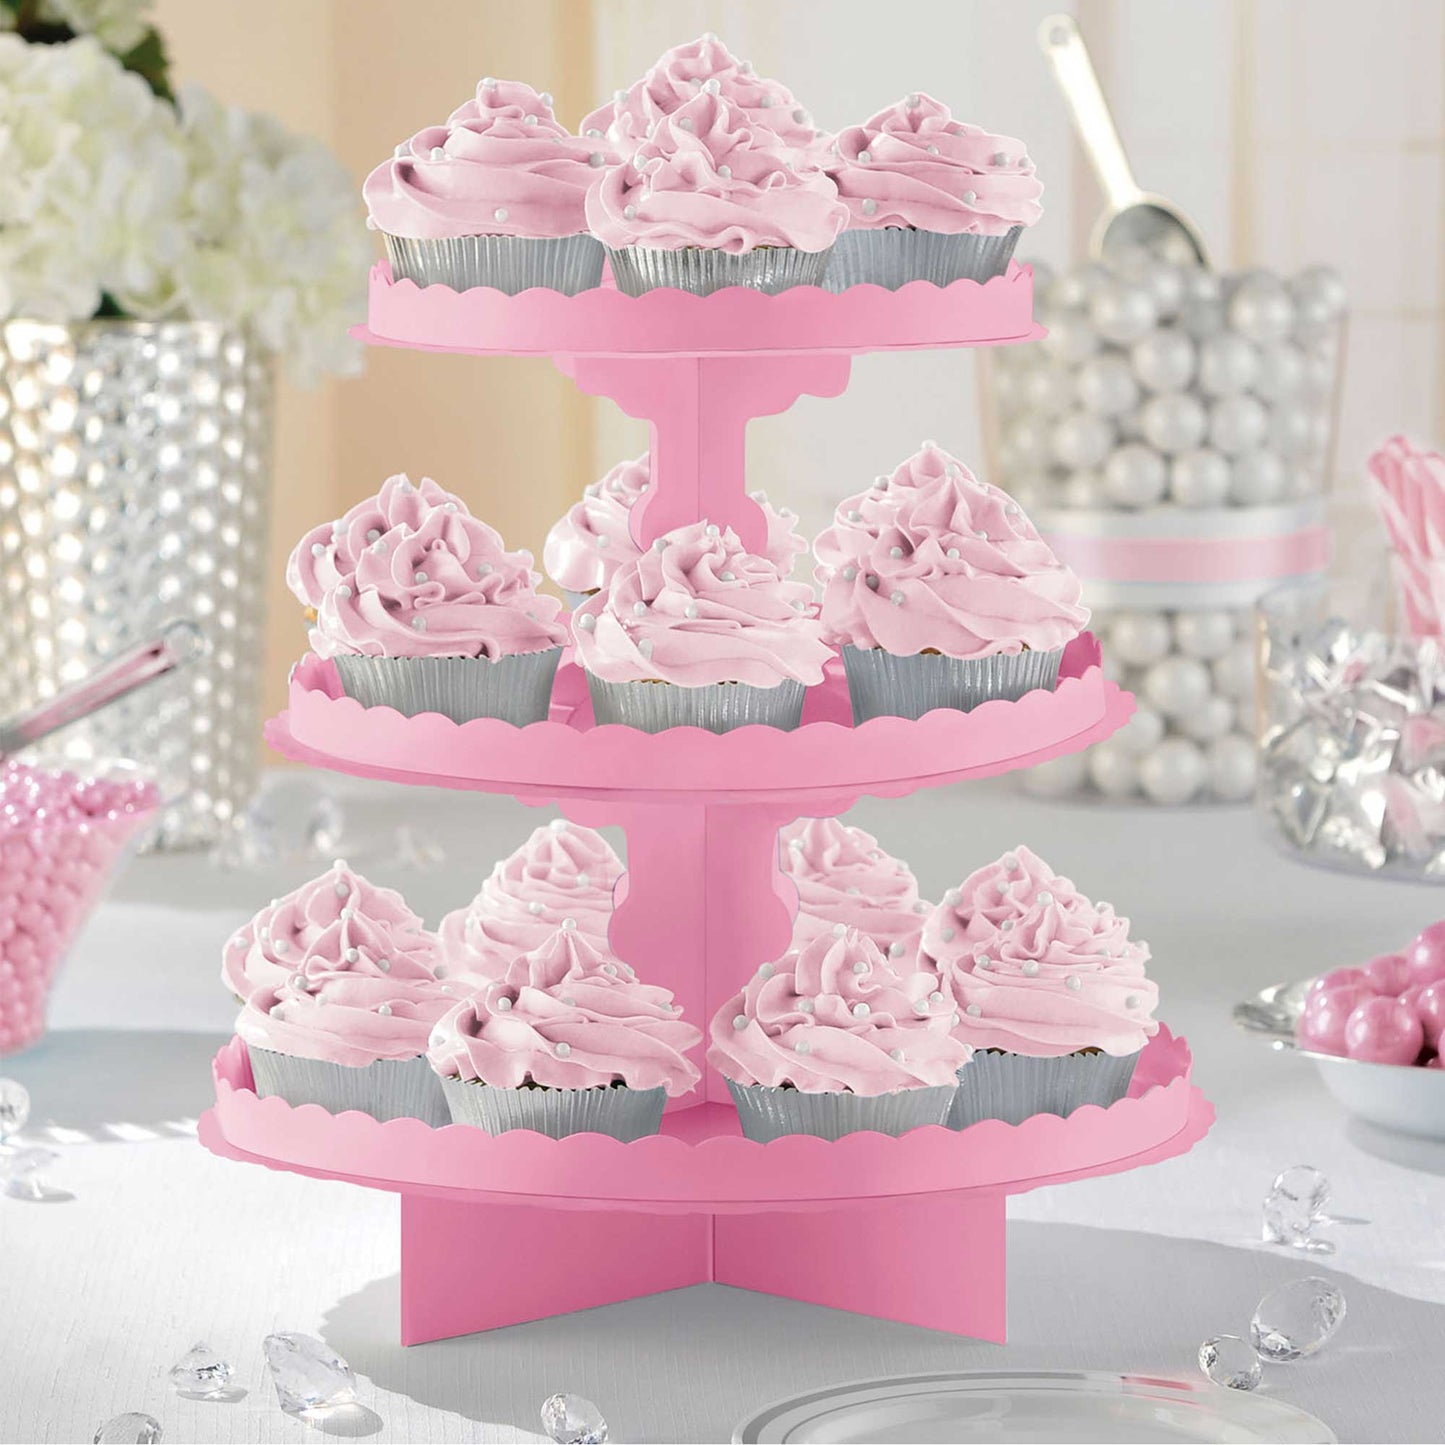 Cupcake 3 Tier Treat Stand New Pink